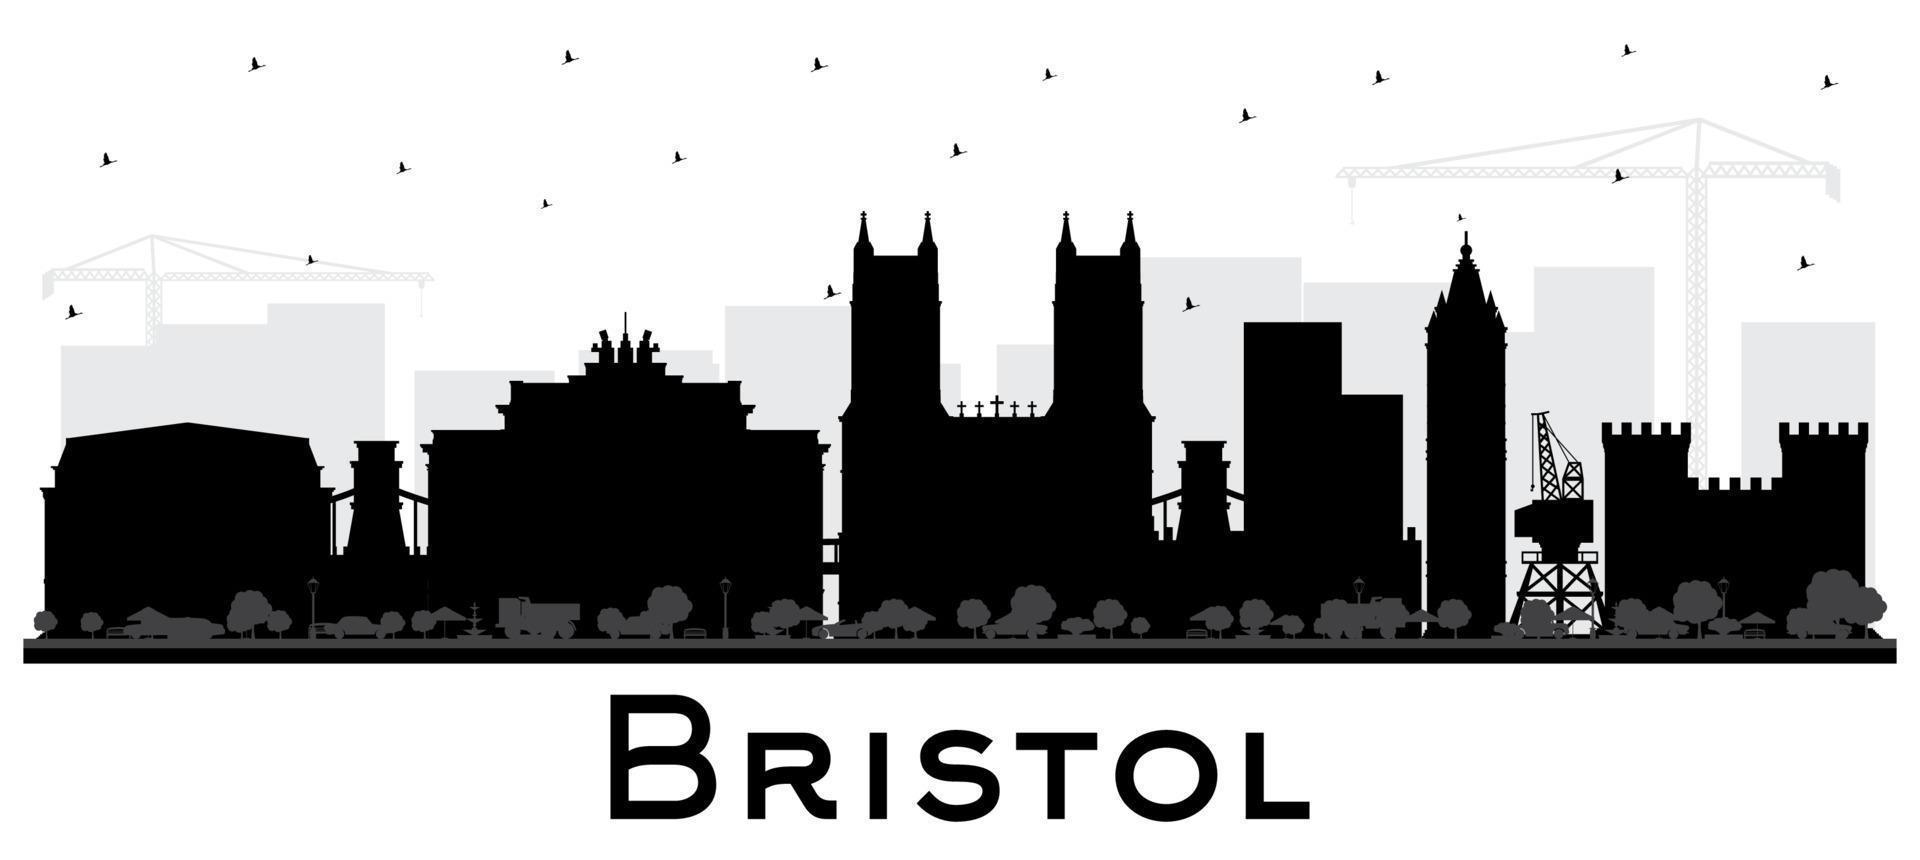 Bristol UK City Skyline Silhouette with Black Buildings Isolated on White. vector